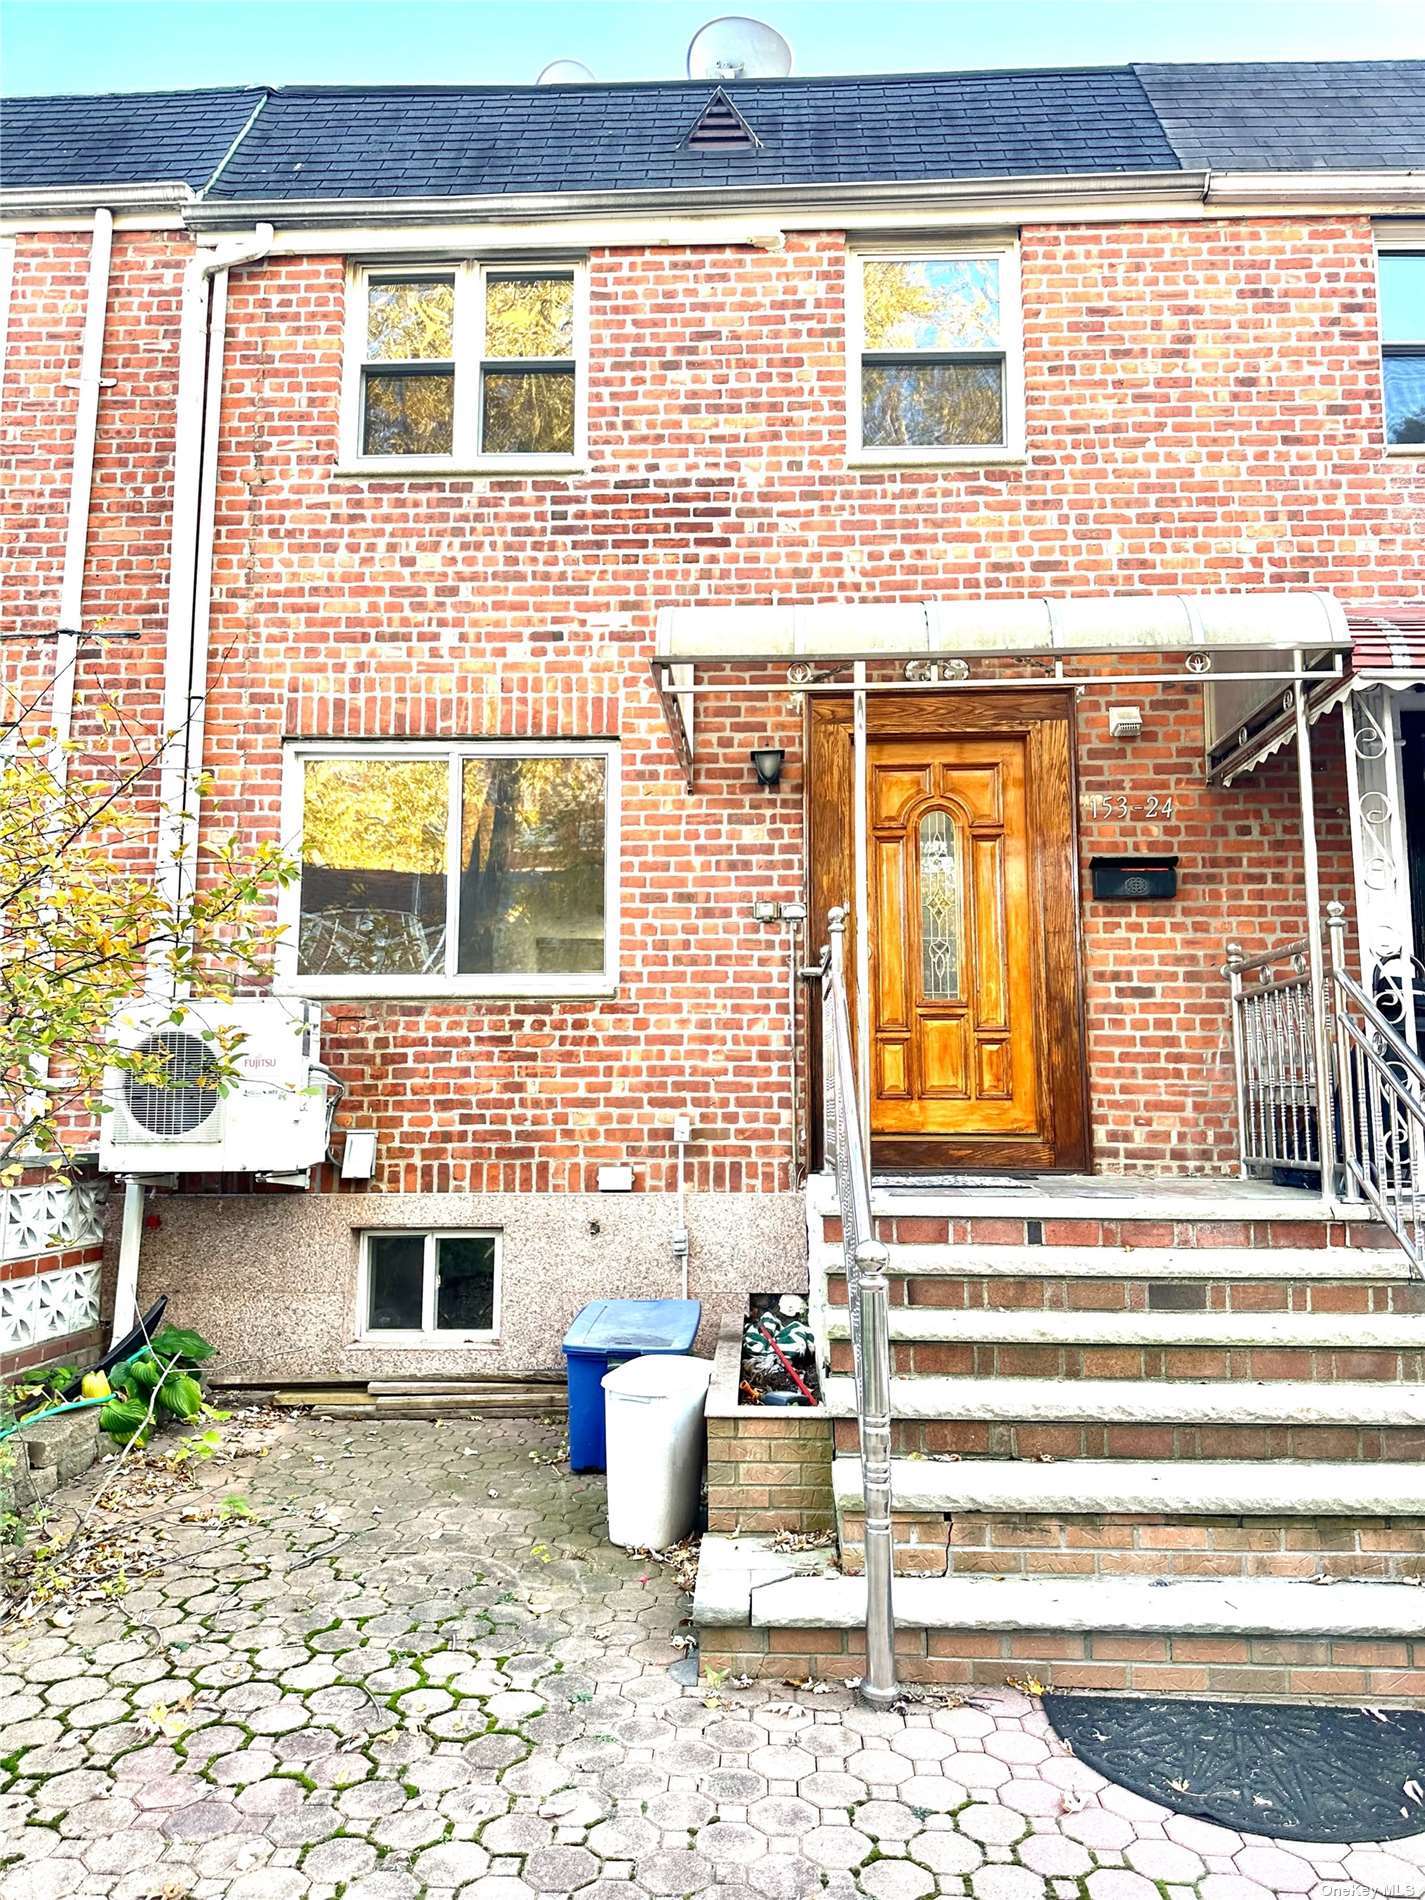 House in Kew Garden Hills - 76th  Queens, NY 11367